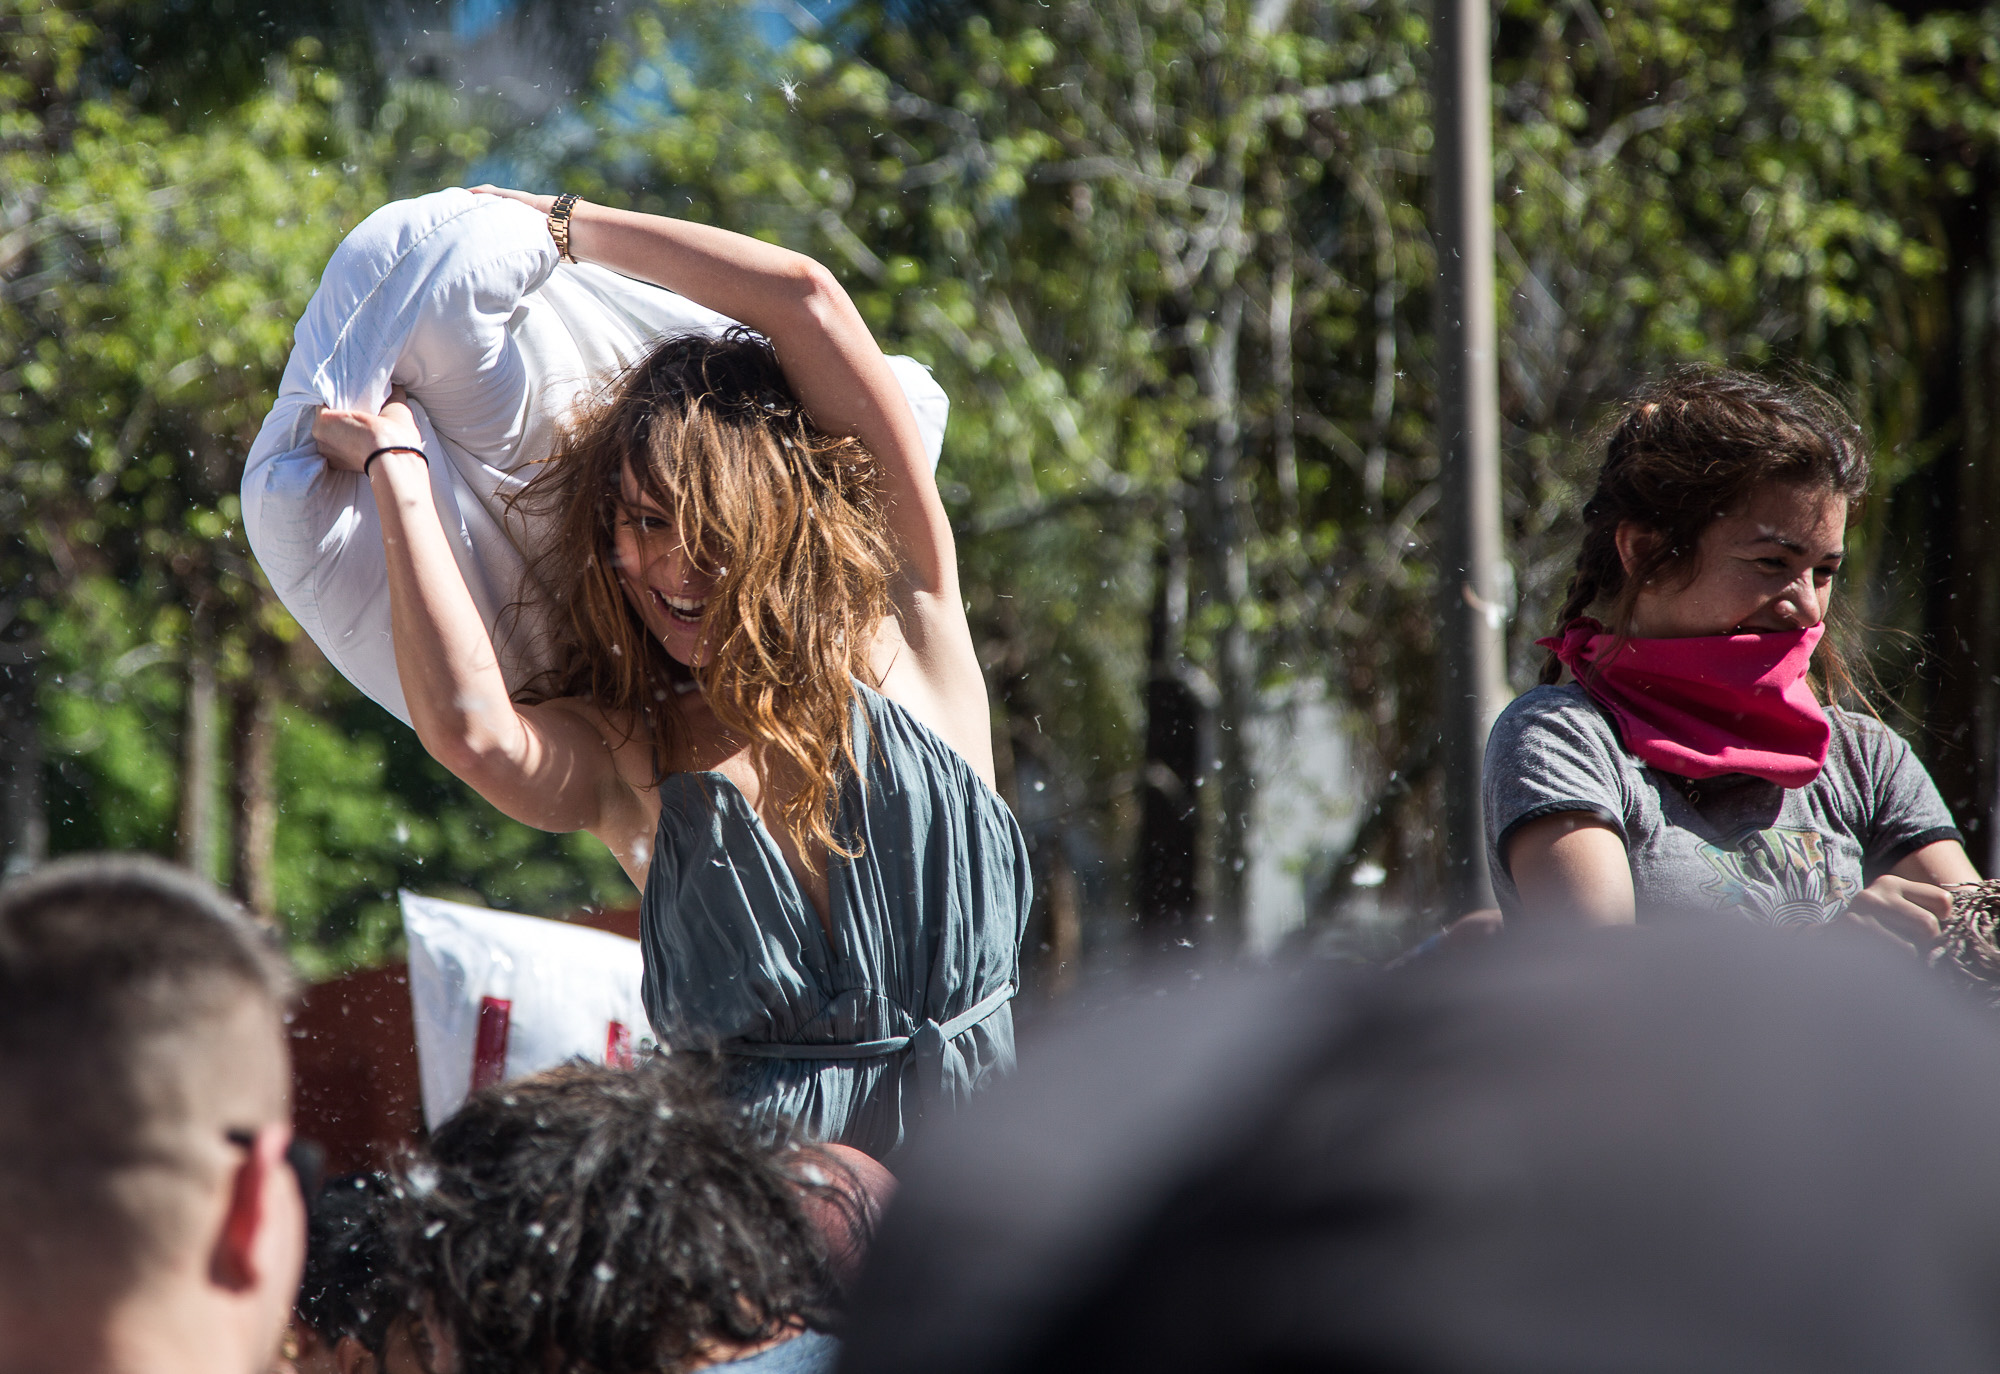  LA local and pillow fight enthusiast Daria Ritch nails powerful pillow strikes against her opponents as she sits on her boyfriends’ shoulders during the National Pillow Fight Day event which took place in Pershing Square in Downtown Los Angles Calif